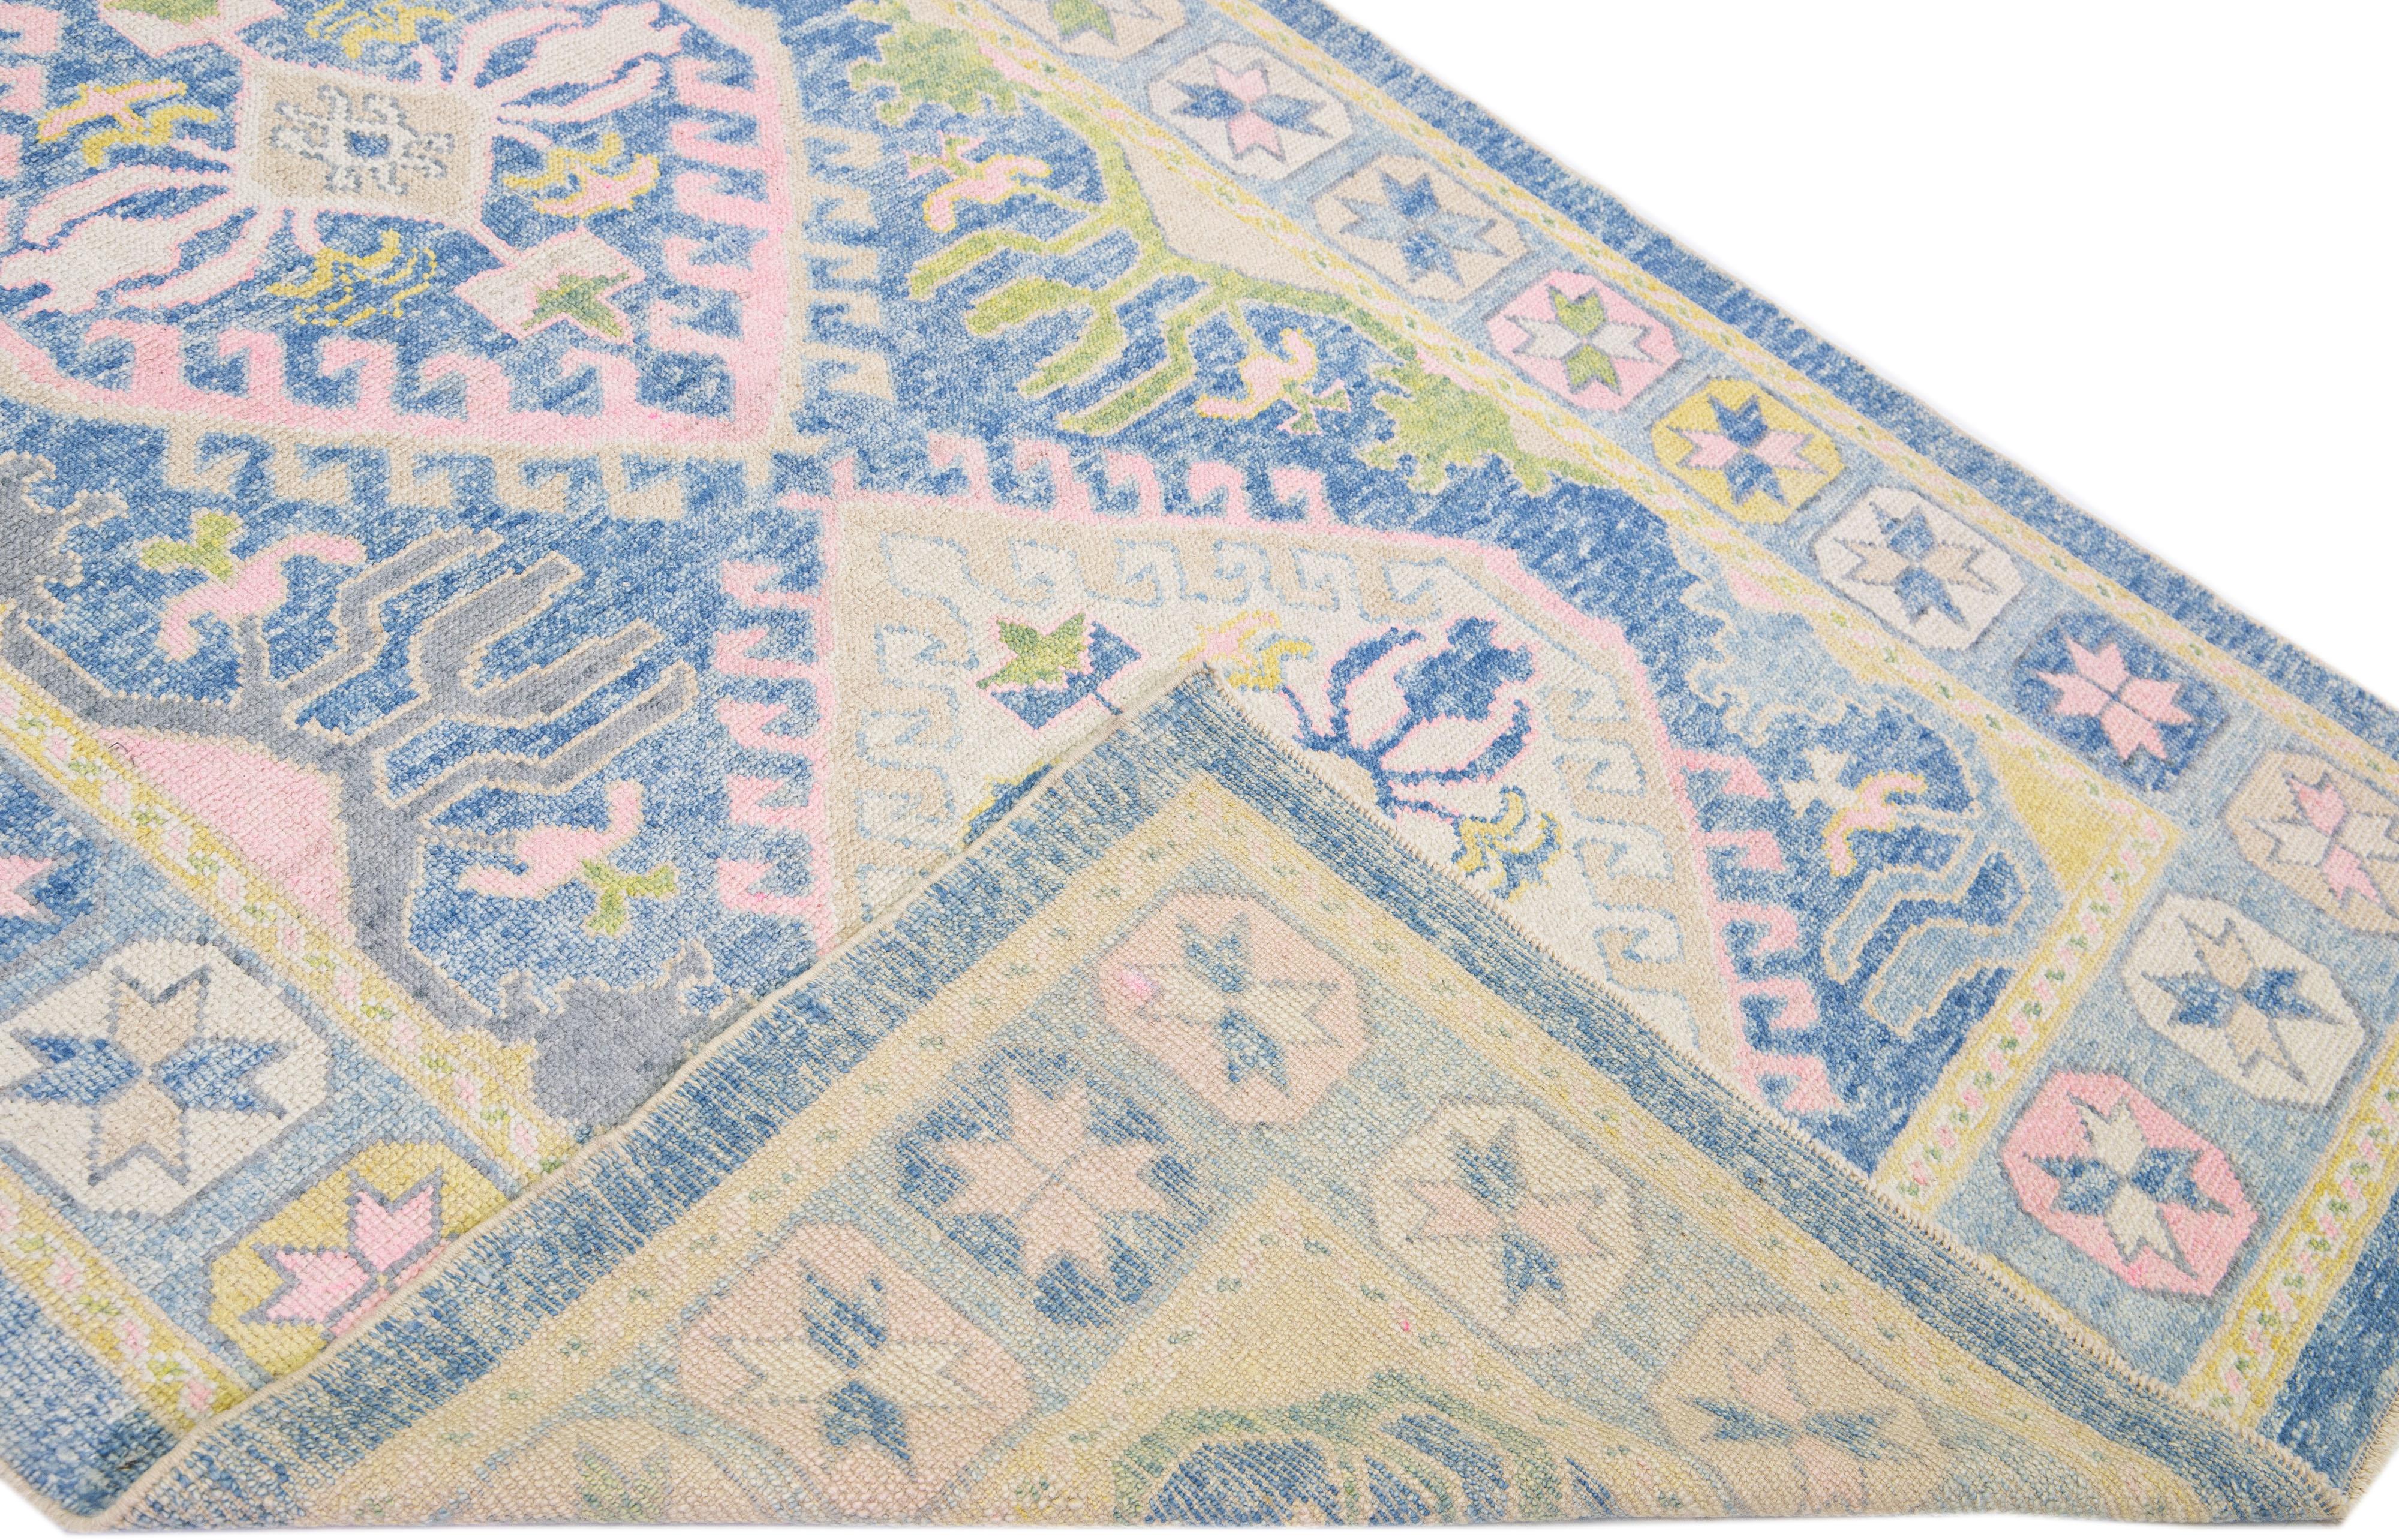 Beautiful modern Oushak hand-knotted wool rug with a blue color field. This Turkish Piece has yellow, gray, and pink accent colors in a gorgeous tribal design.

This rug measures: 6' x 16'7